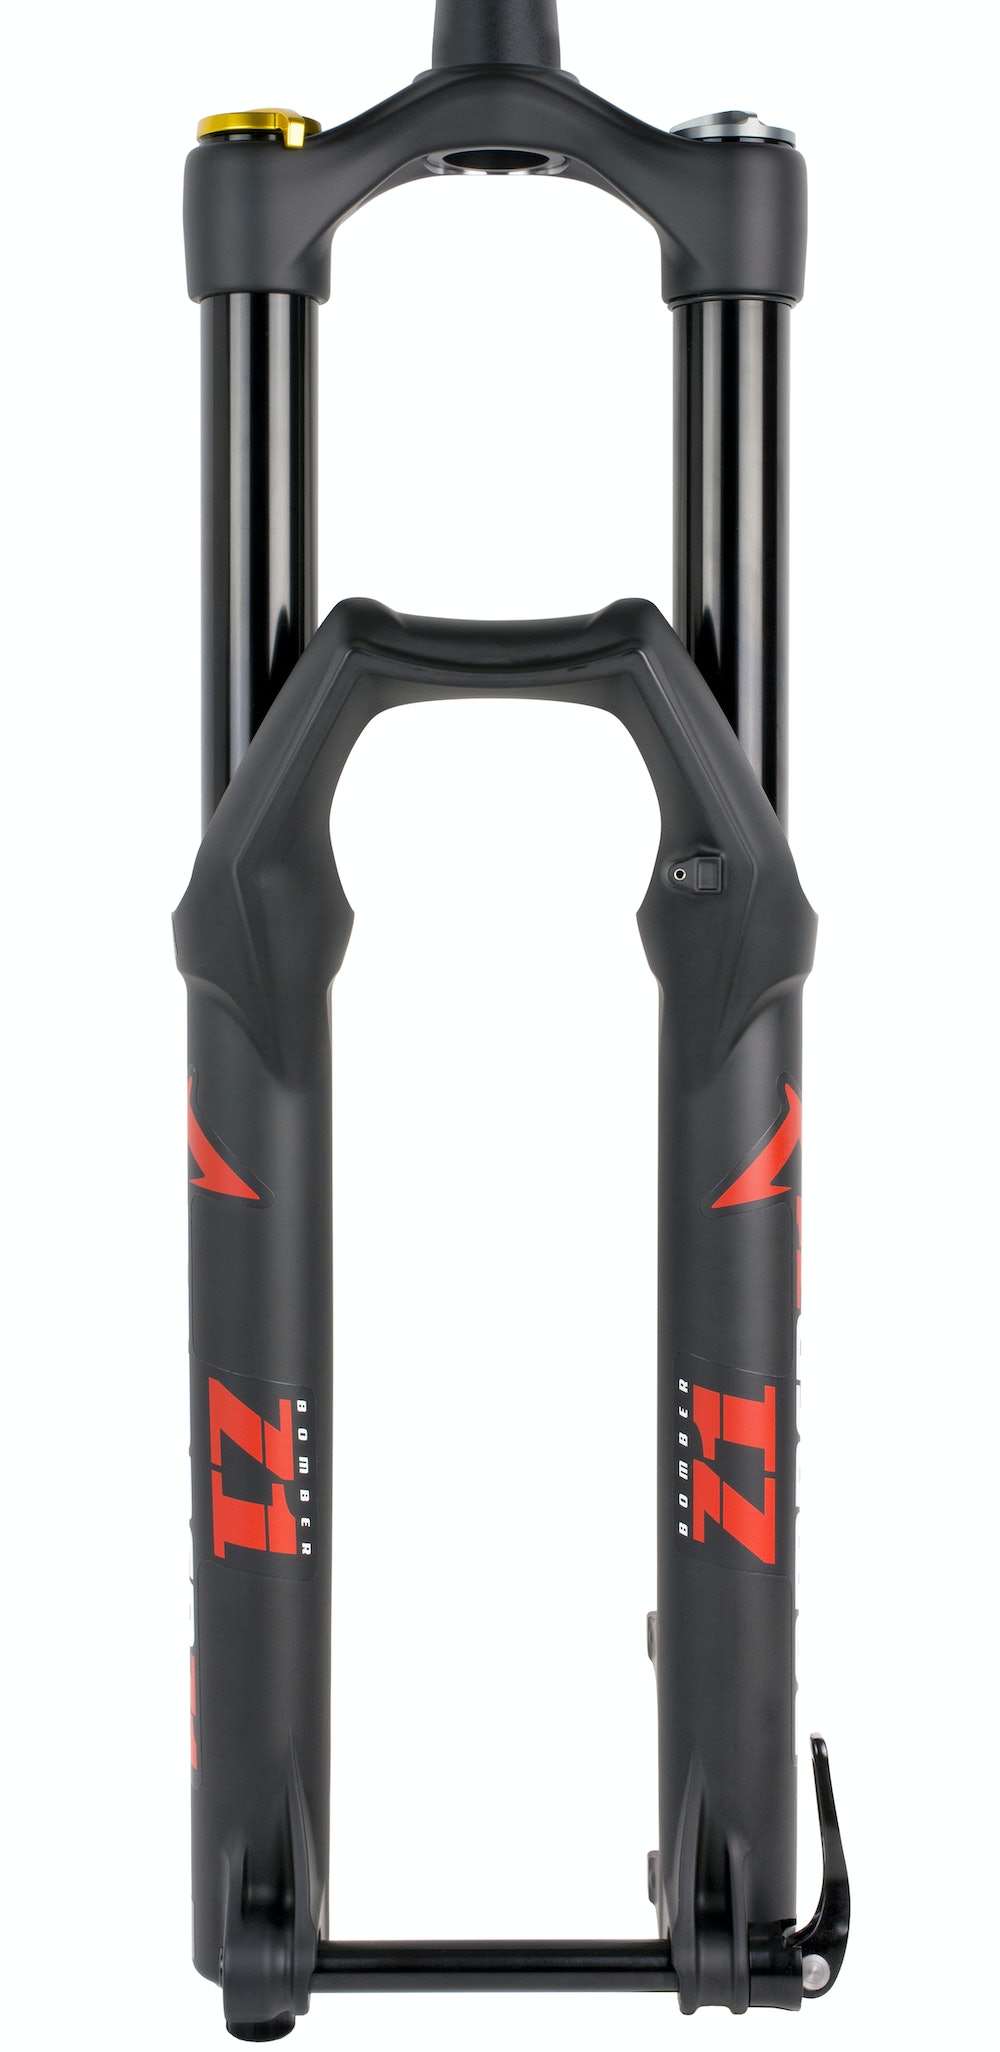 Marzocchi Bomber Z1 27.5 Fork Specification